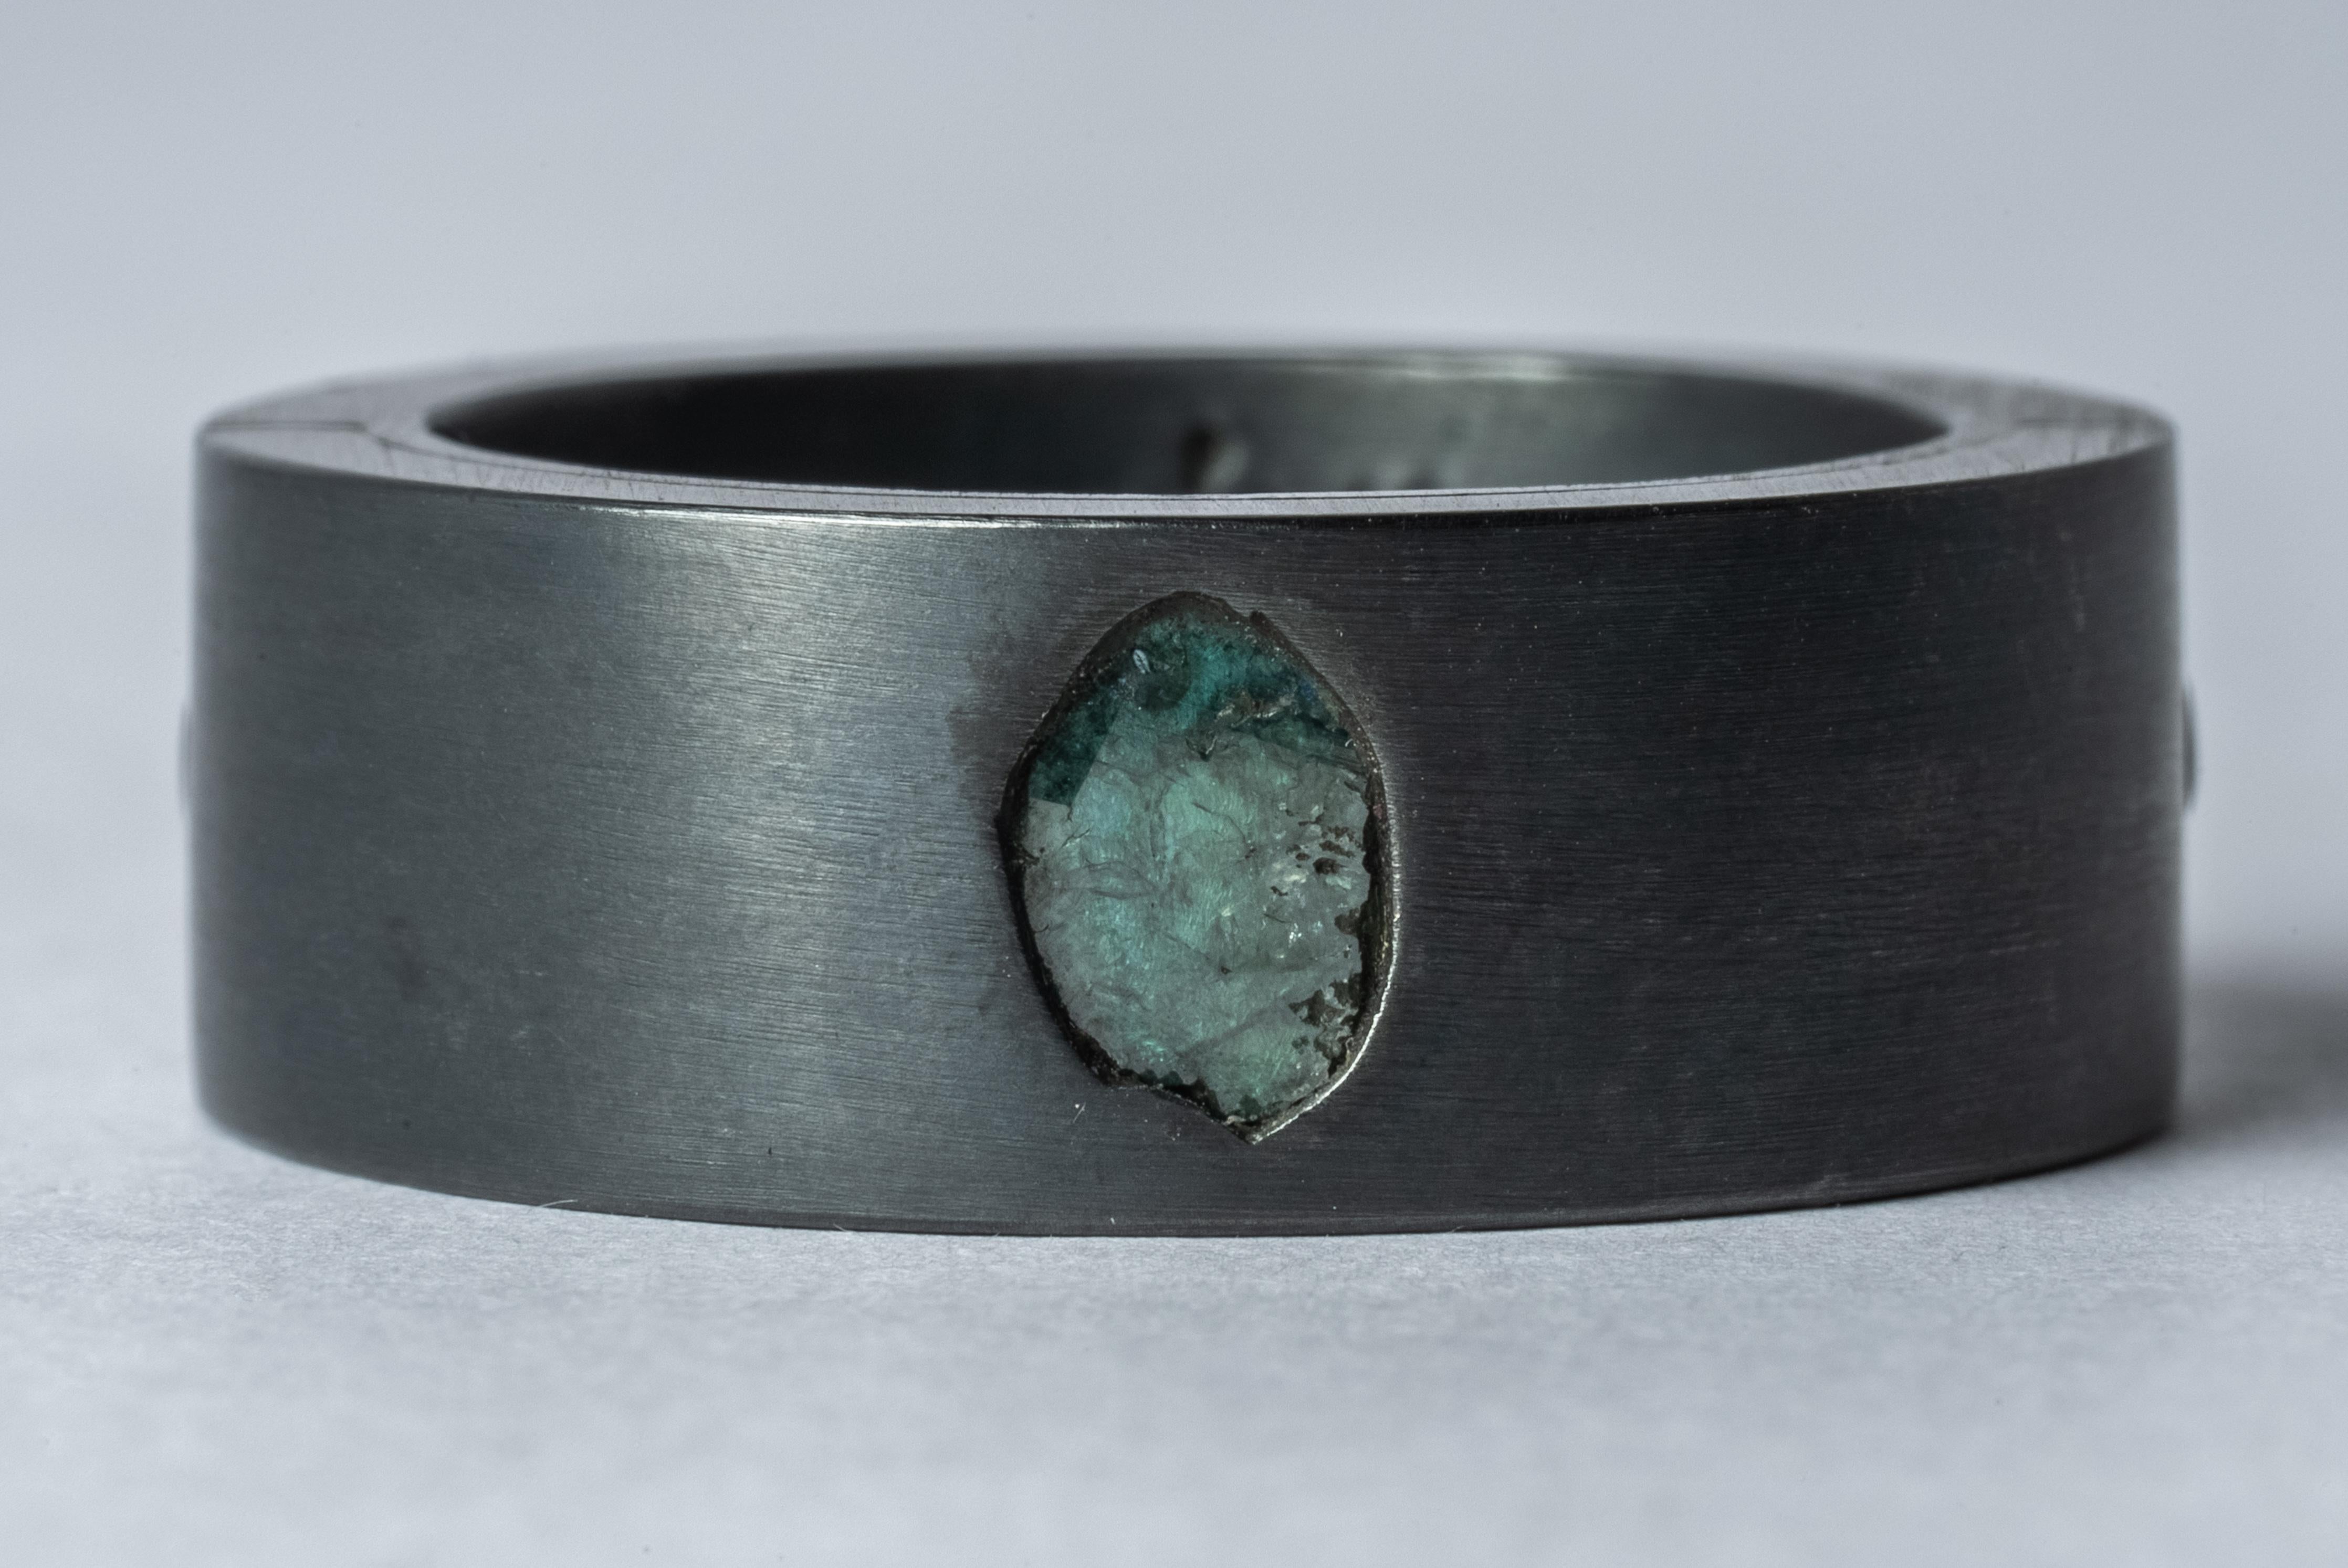 Ring in oxidized sterling silver and a slab of rough diamond. The Sistema series is first family within Parts of Four. As a mode of creation it expresses the core principle of P/4 which is modularity. The 